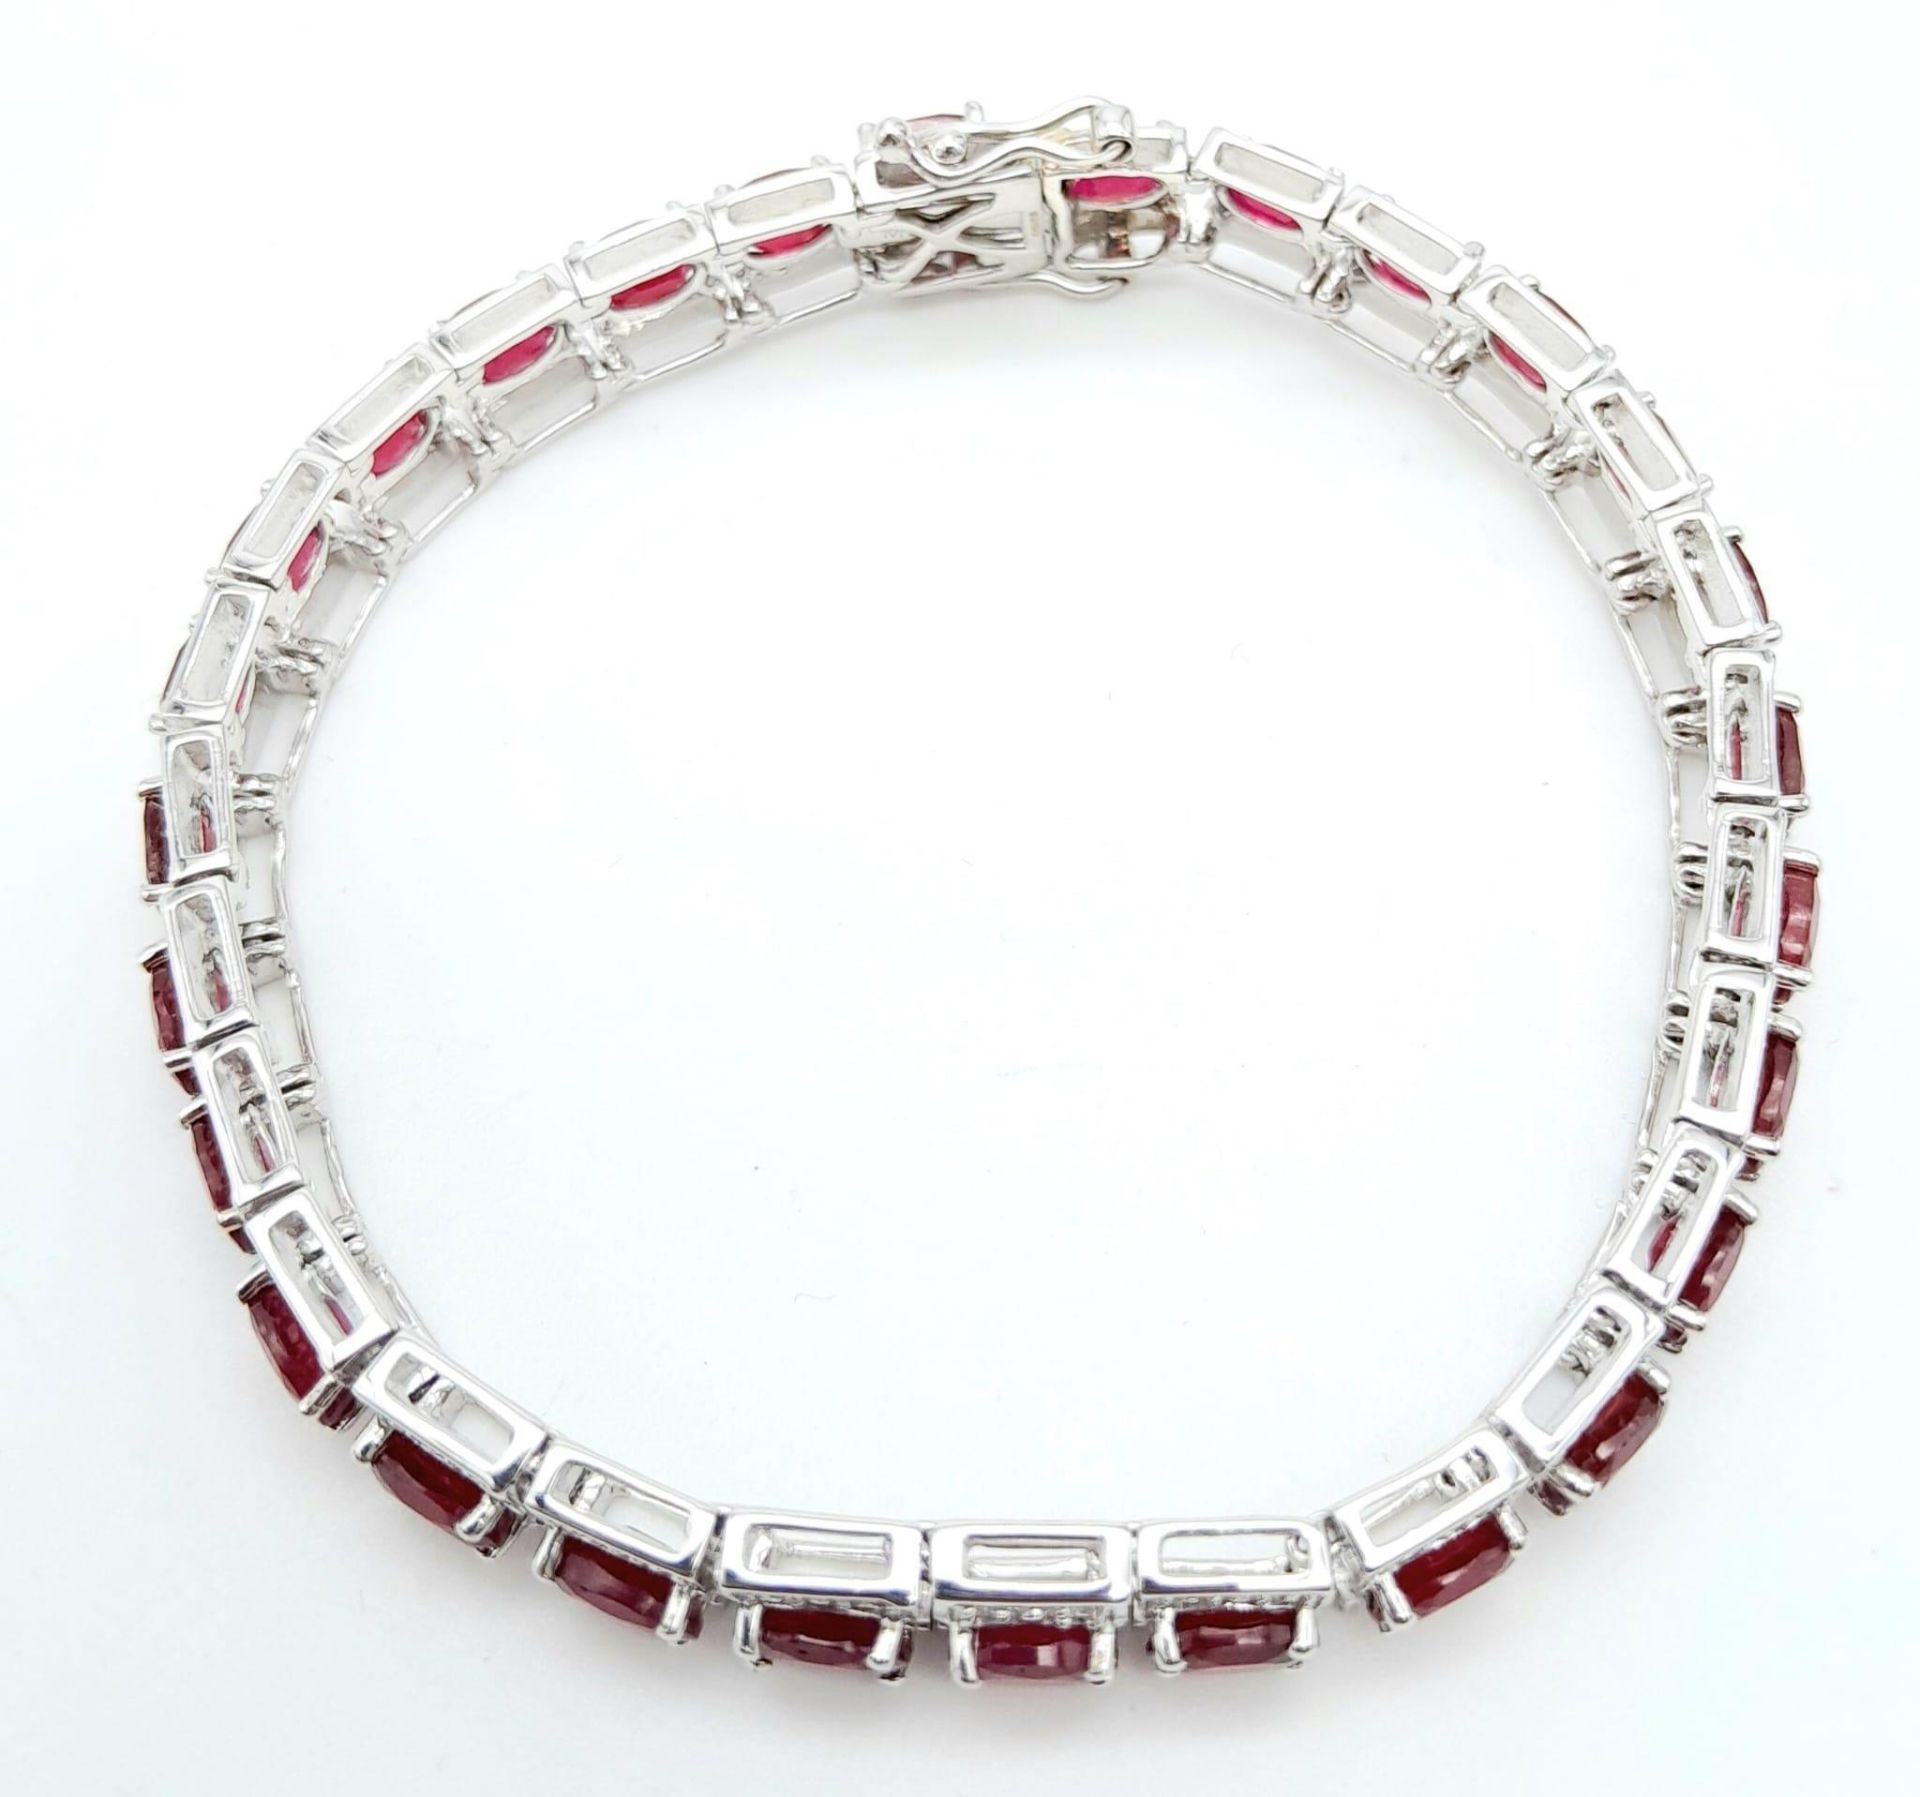 An Exquisite Hallmarked 2018 Sterling Silver 28 Oval Cut Ruby Set Bracelet. Each Ruby Measures 5mm - Image 3 of 6